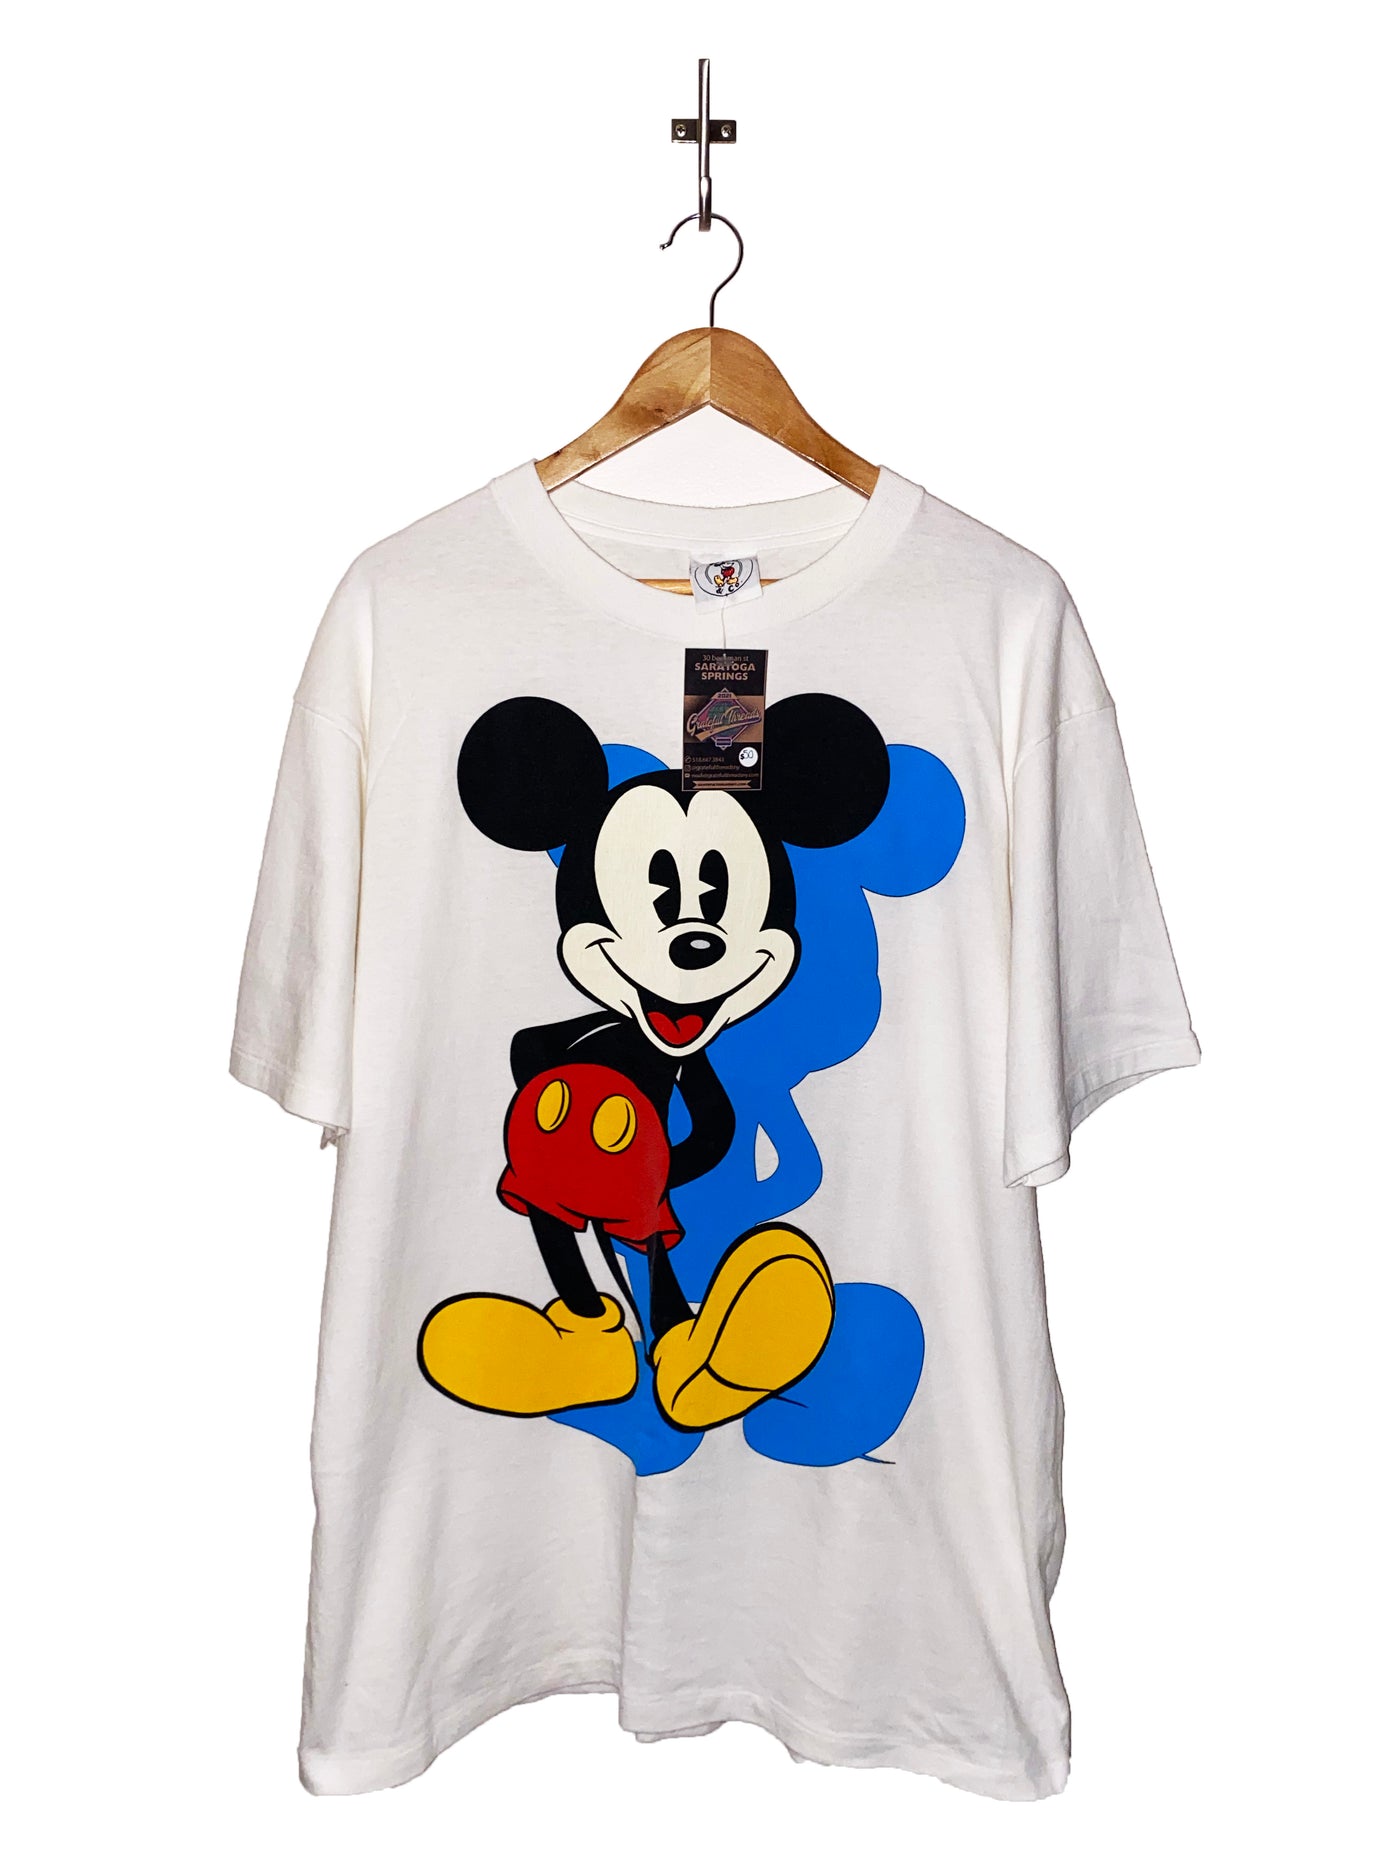 Vintage 80s Mickey & Co Mickey Mouse T-Shirt